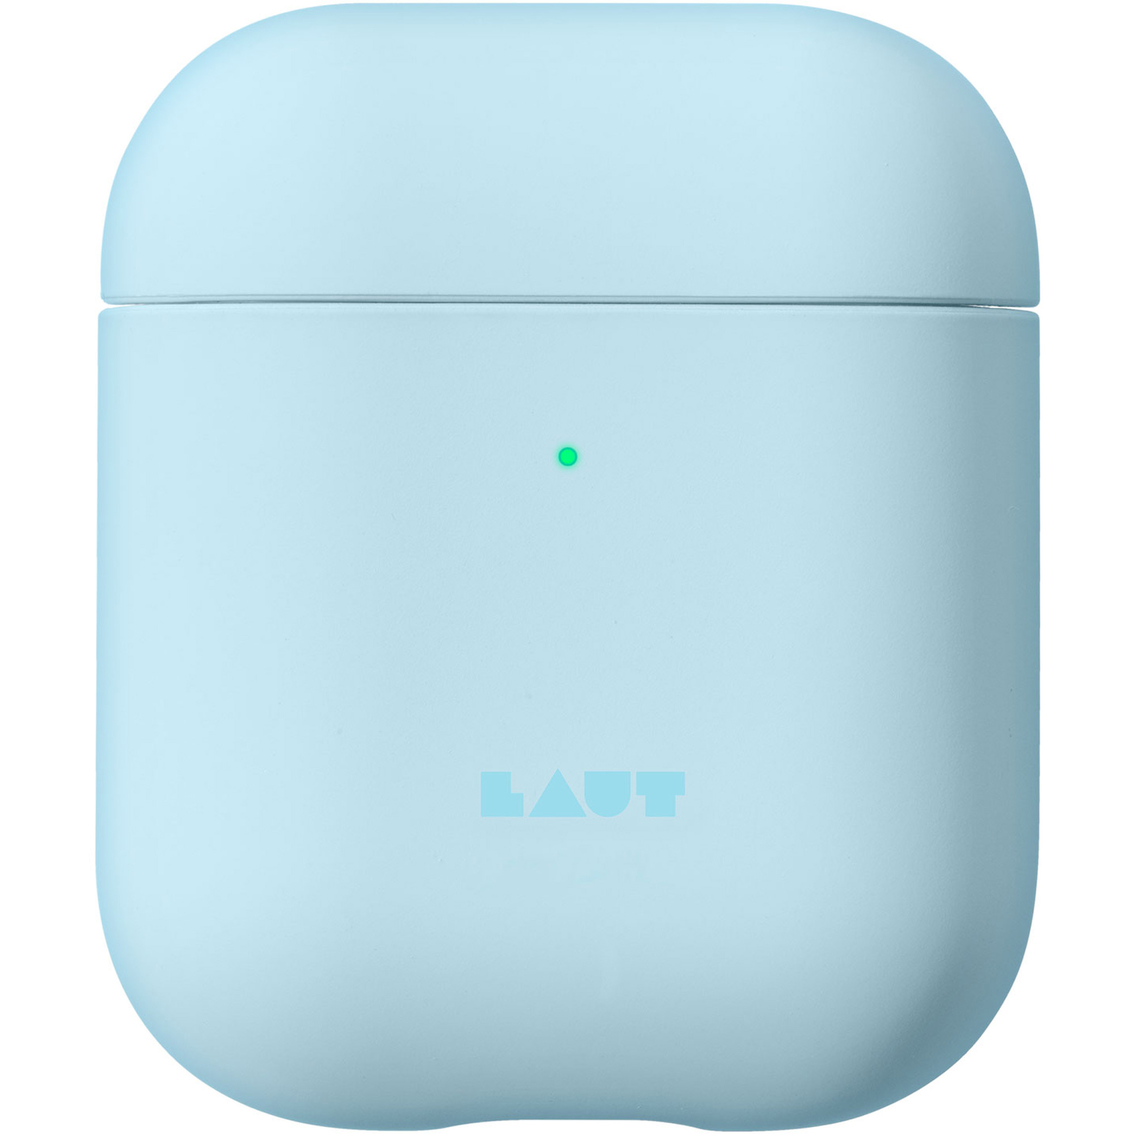 Laut Huex Pastels Case for AirPods - Image 2 of 5